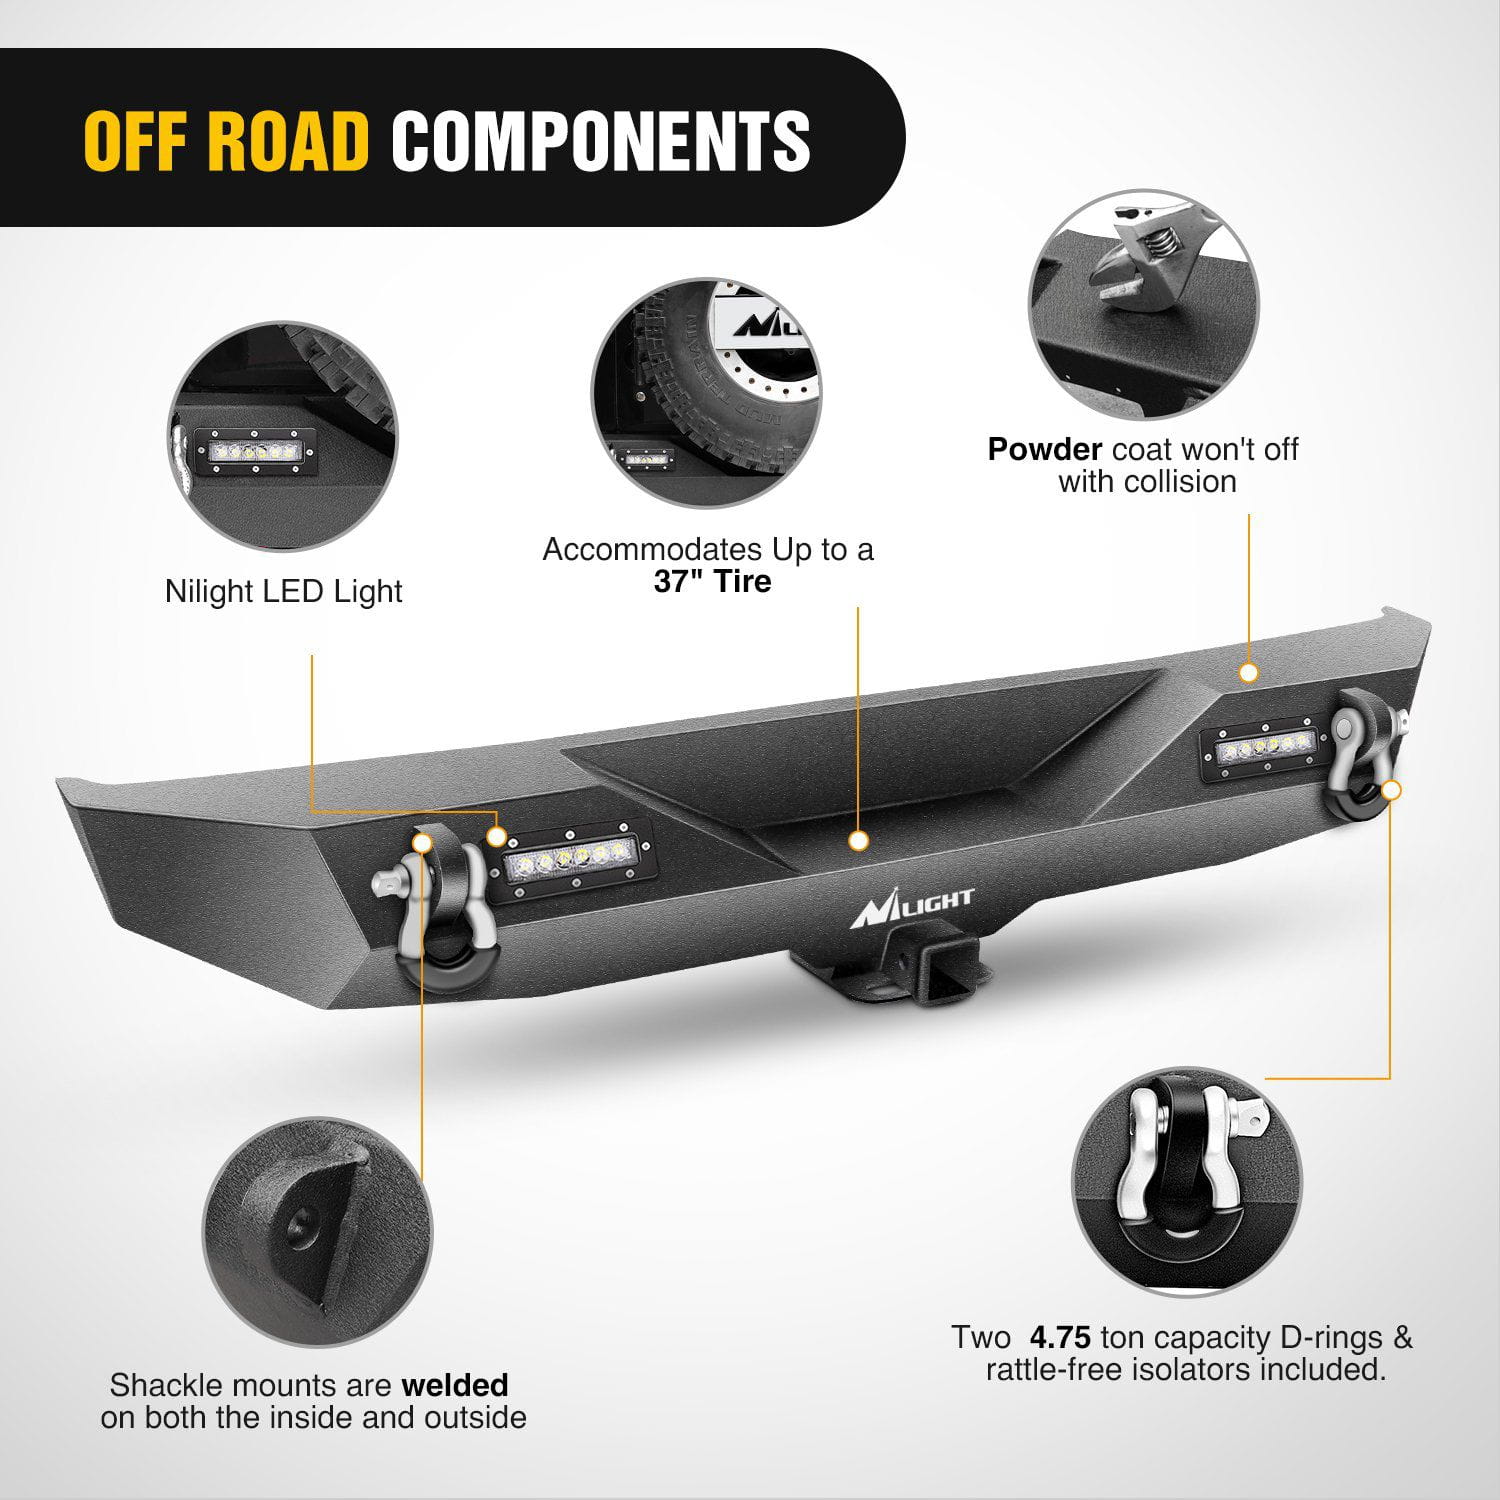 Off Road Components of Nilight Rear Bumper Kit for 2018-2019 Jeep Wrangler JL